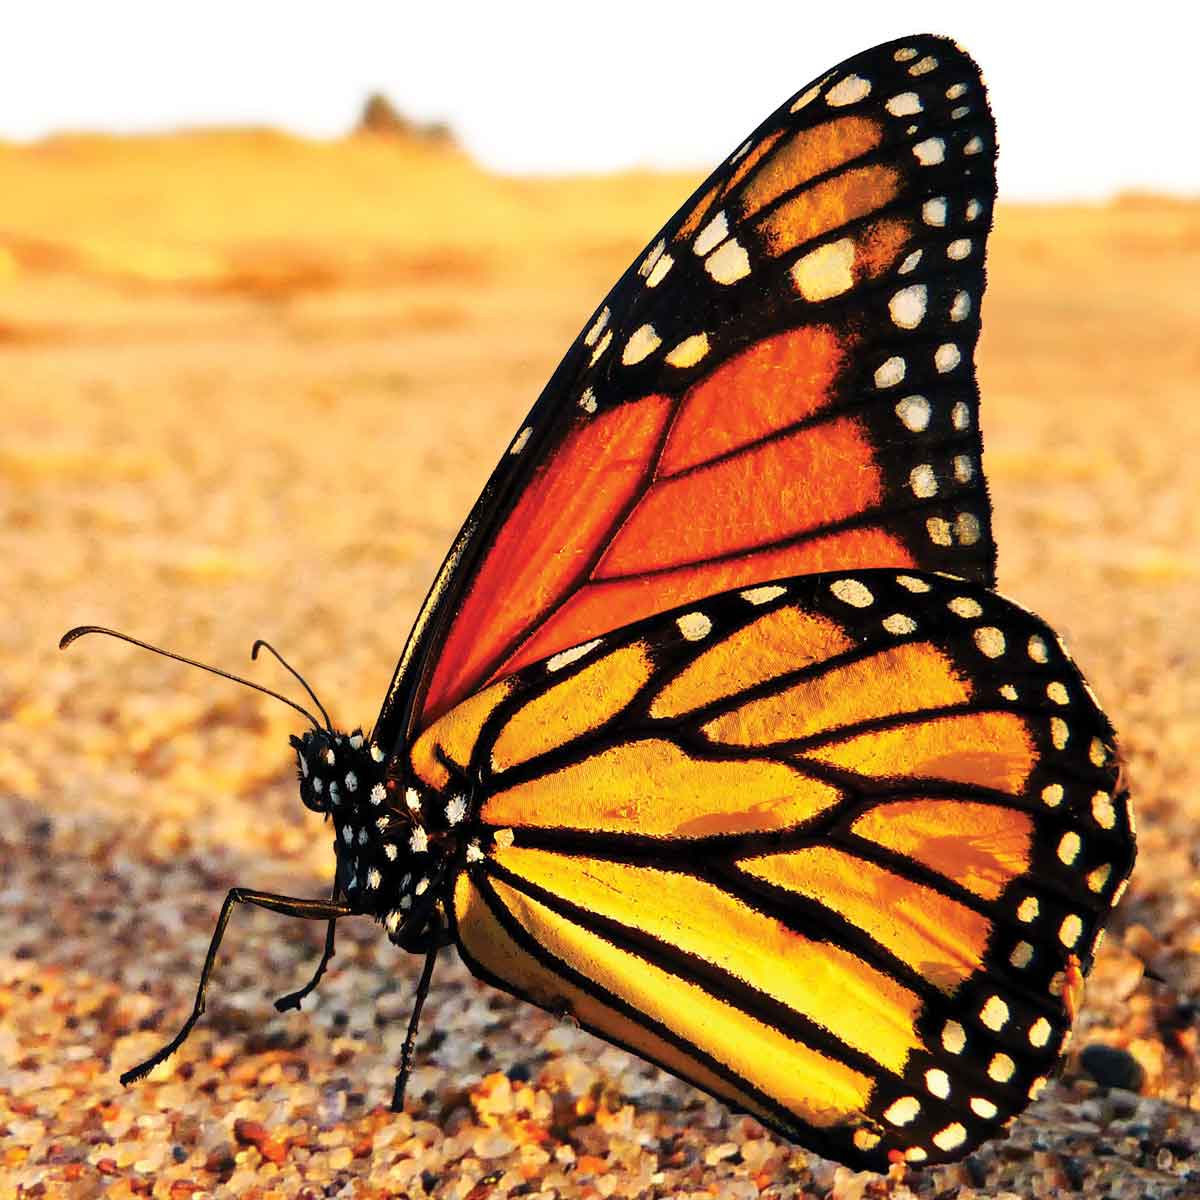 Viewpoint: Climate change, pesticides endanger monarch butterfly populations